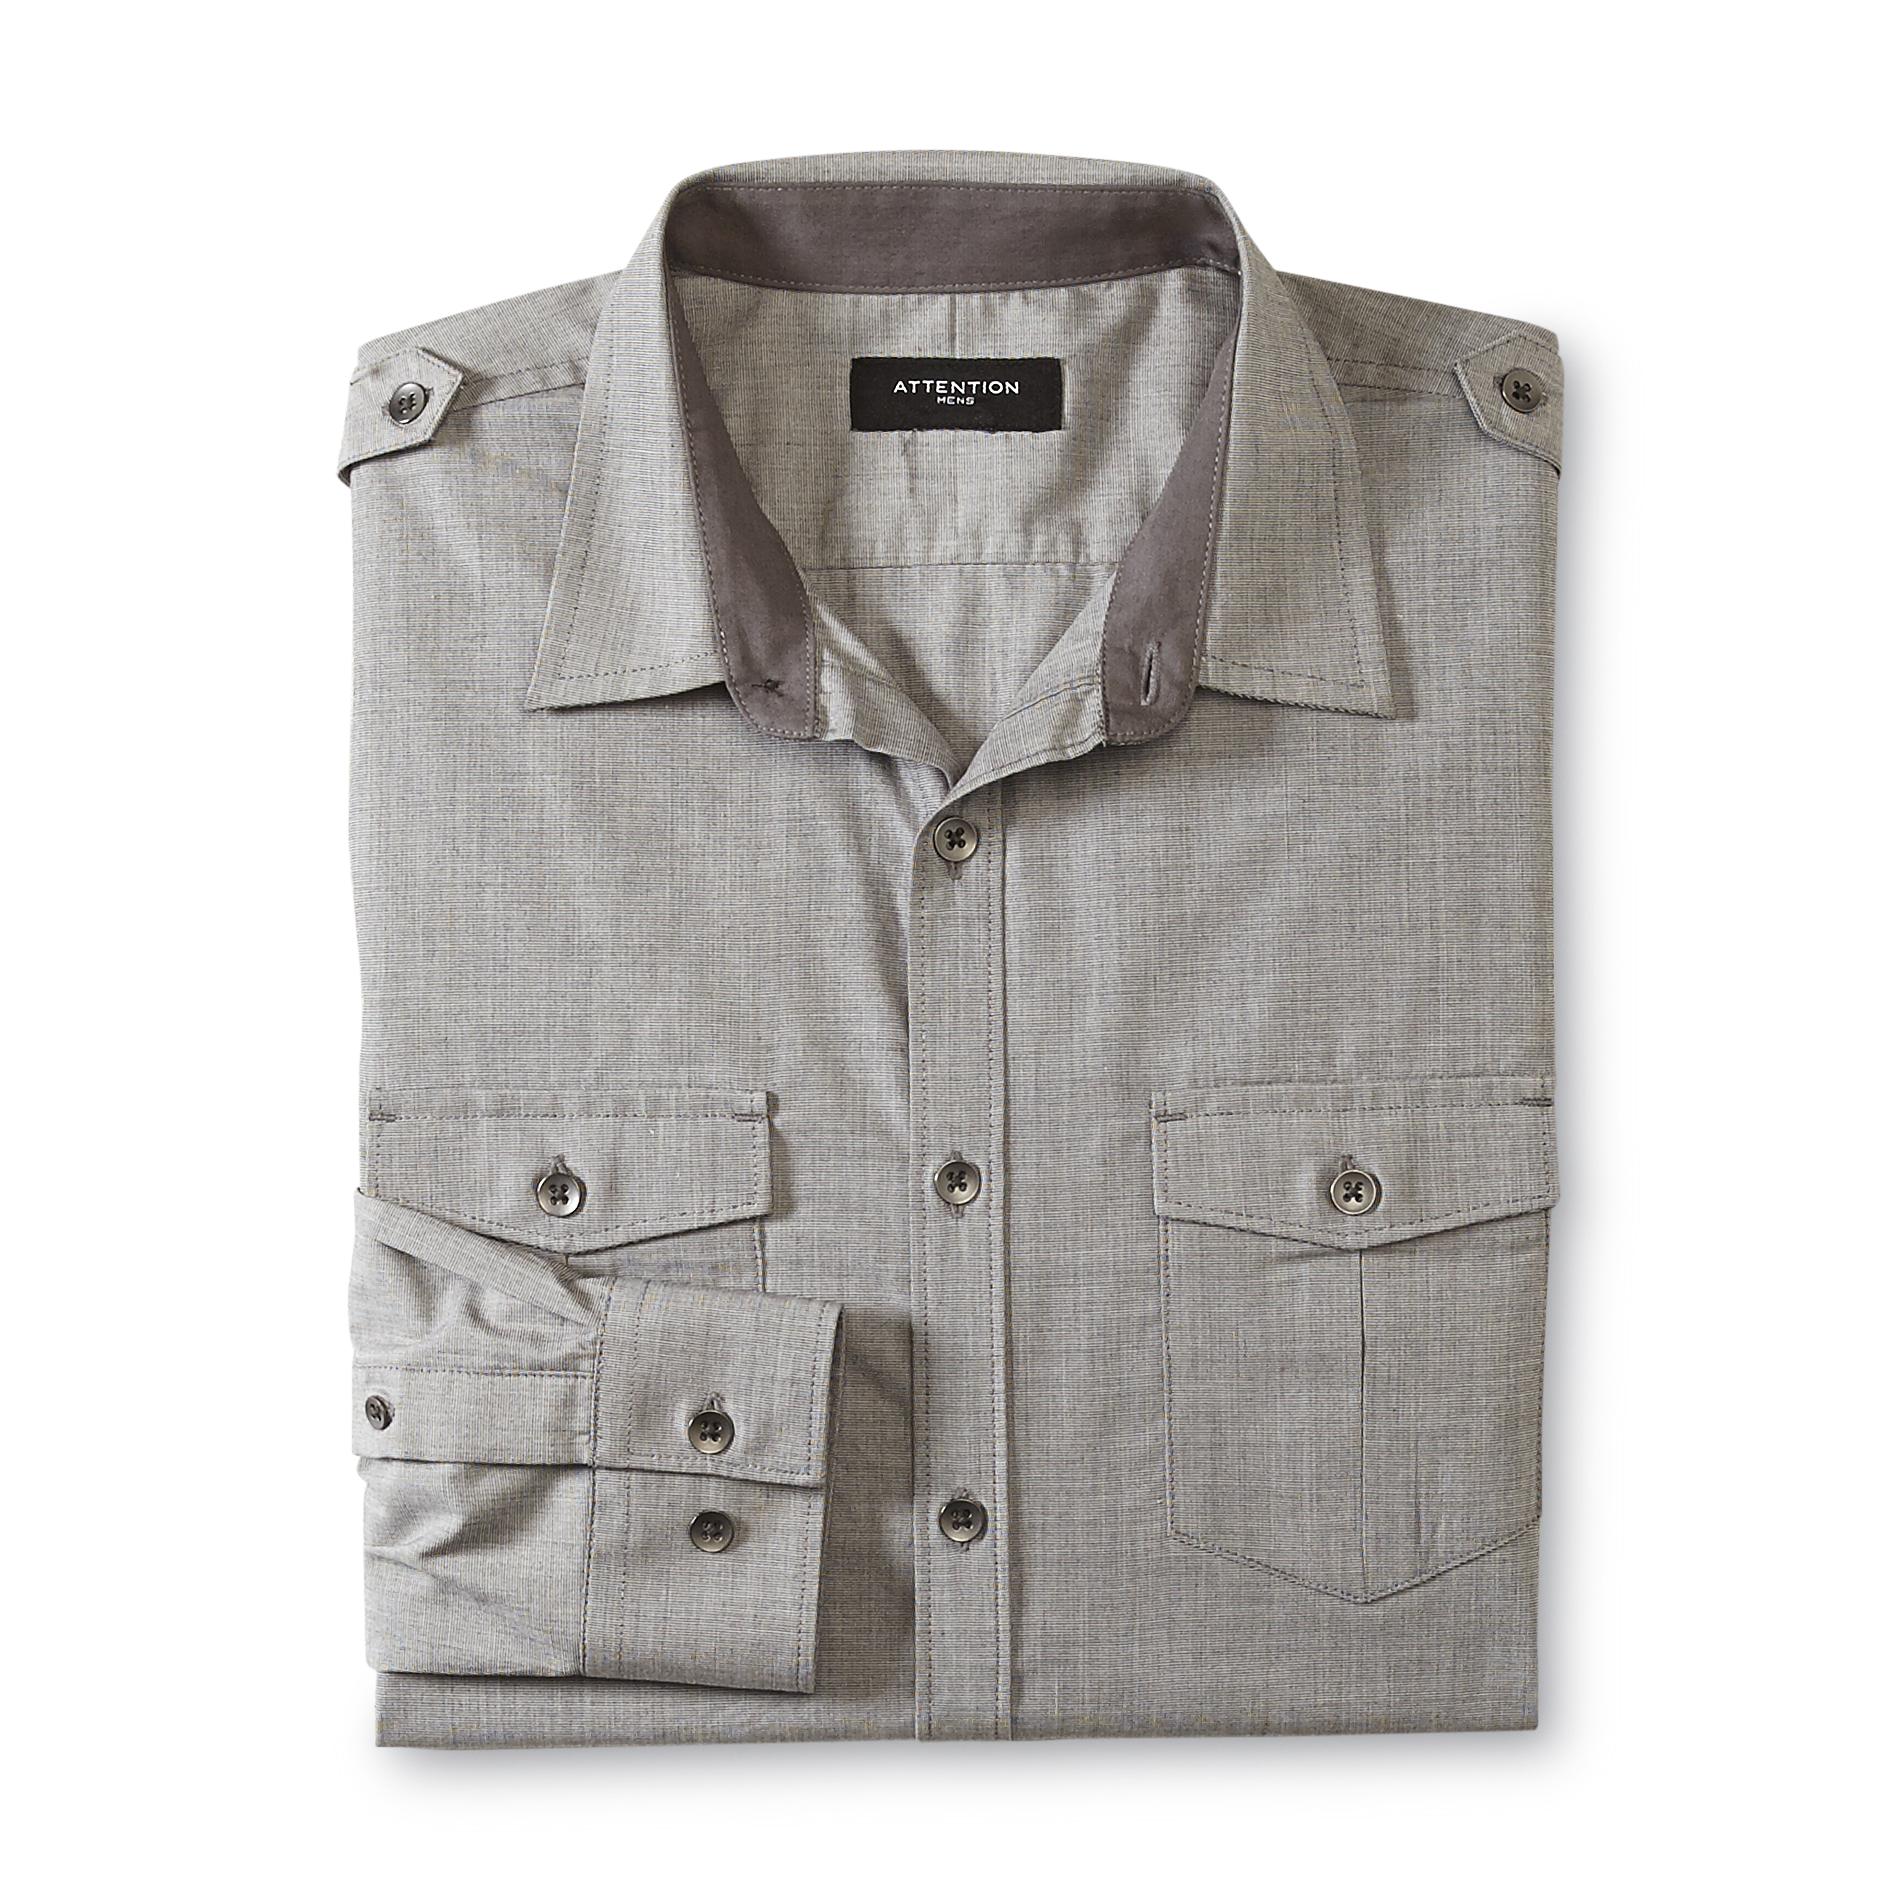 Attention Men's Casual Button-Front Shirt